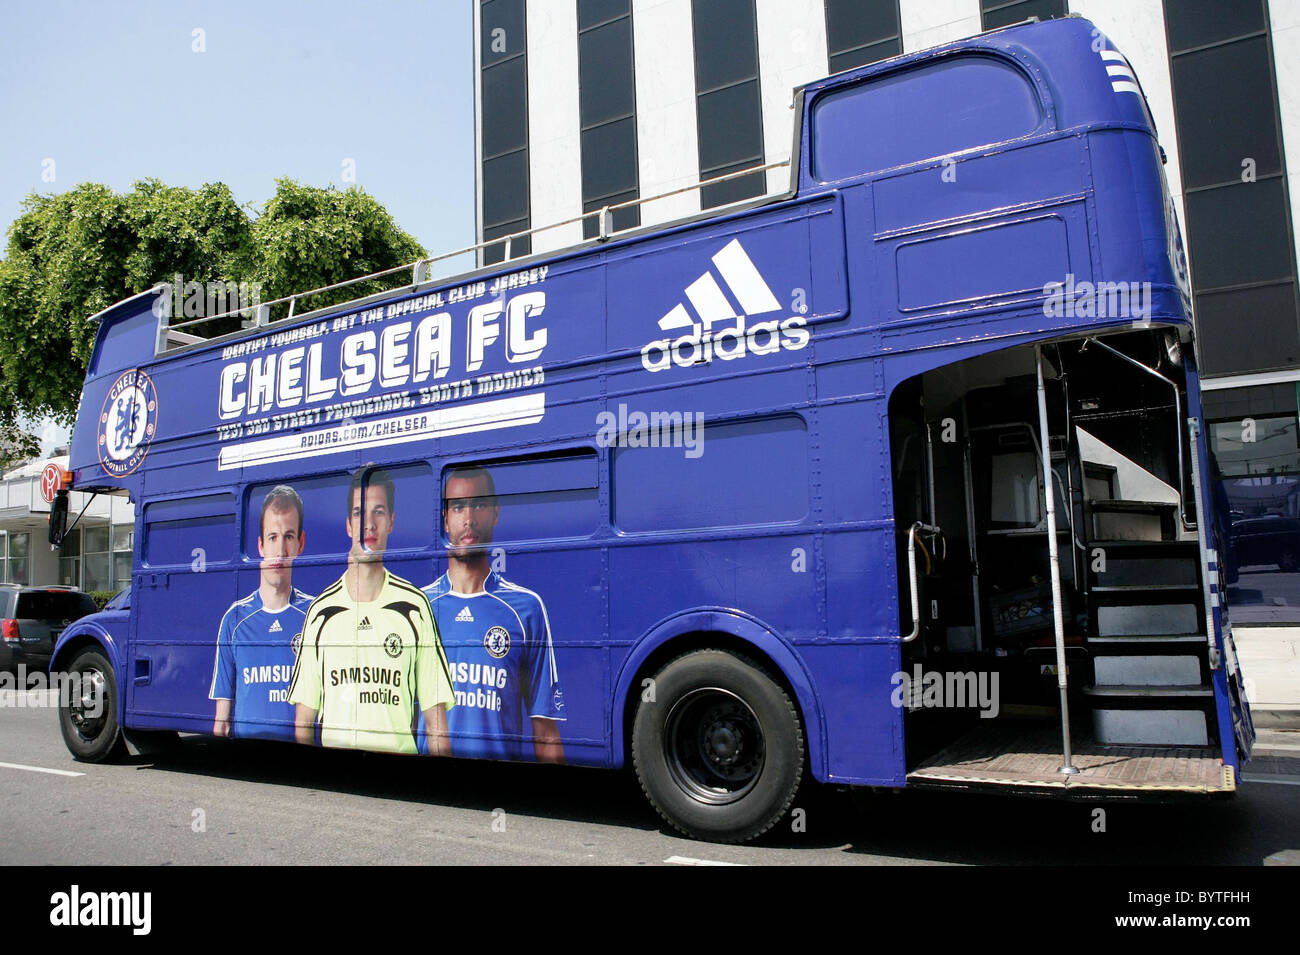 chelsea-fc-promotional-bus-a-london-double-decker-on-the-foreign-roads-BYTFHH.jpg